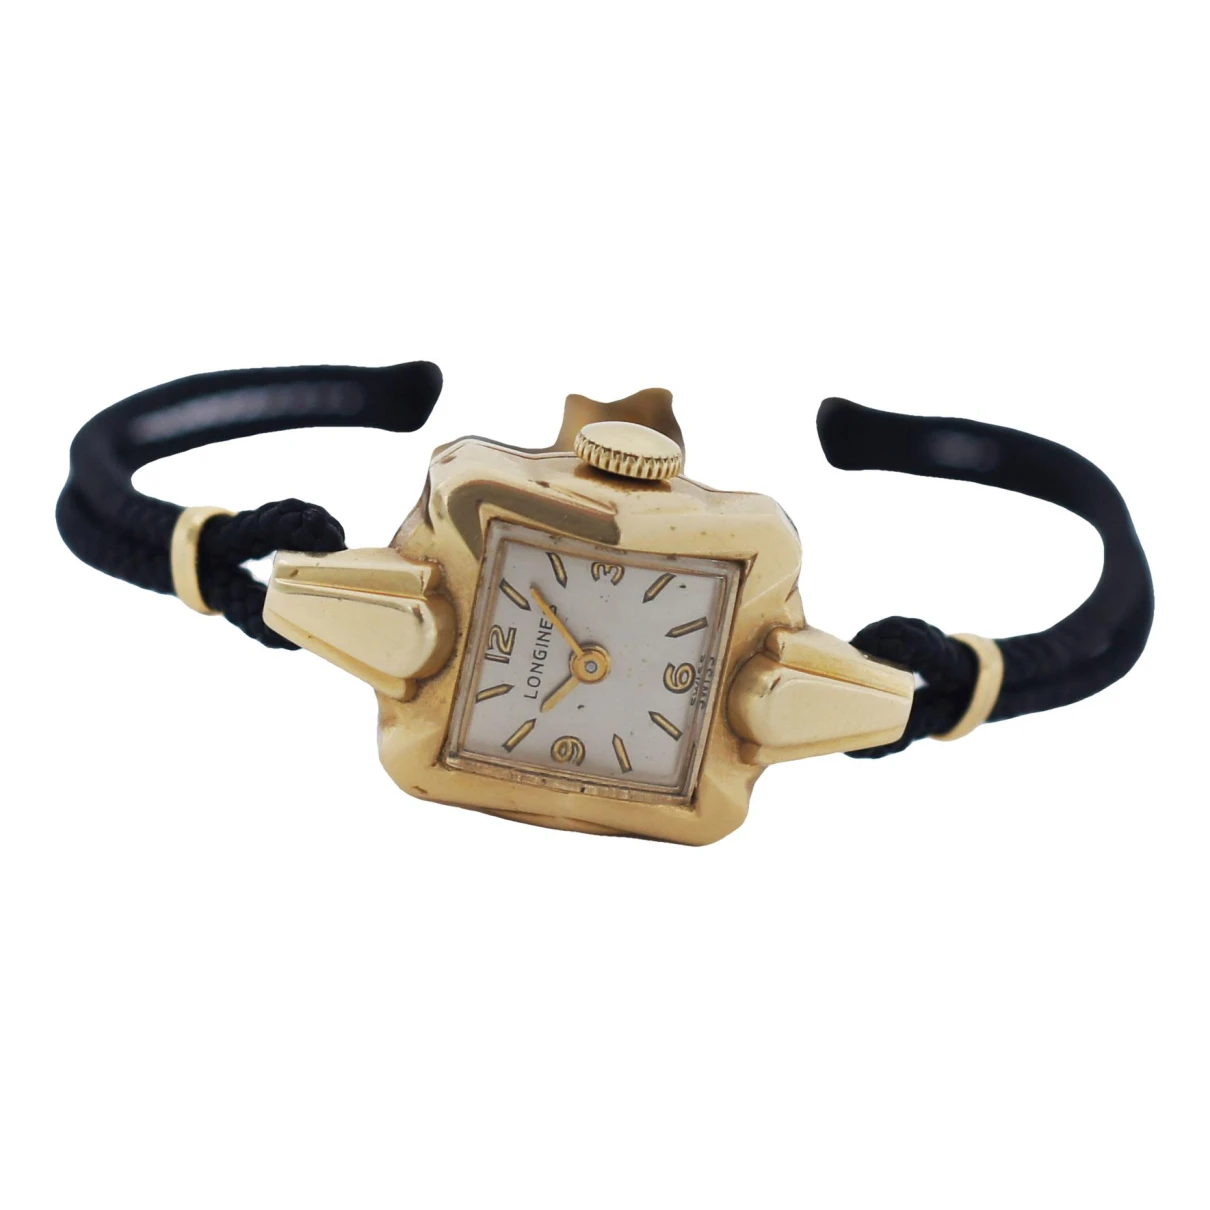 Pre-owned Longines Yellow Gold Watch